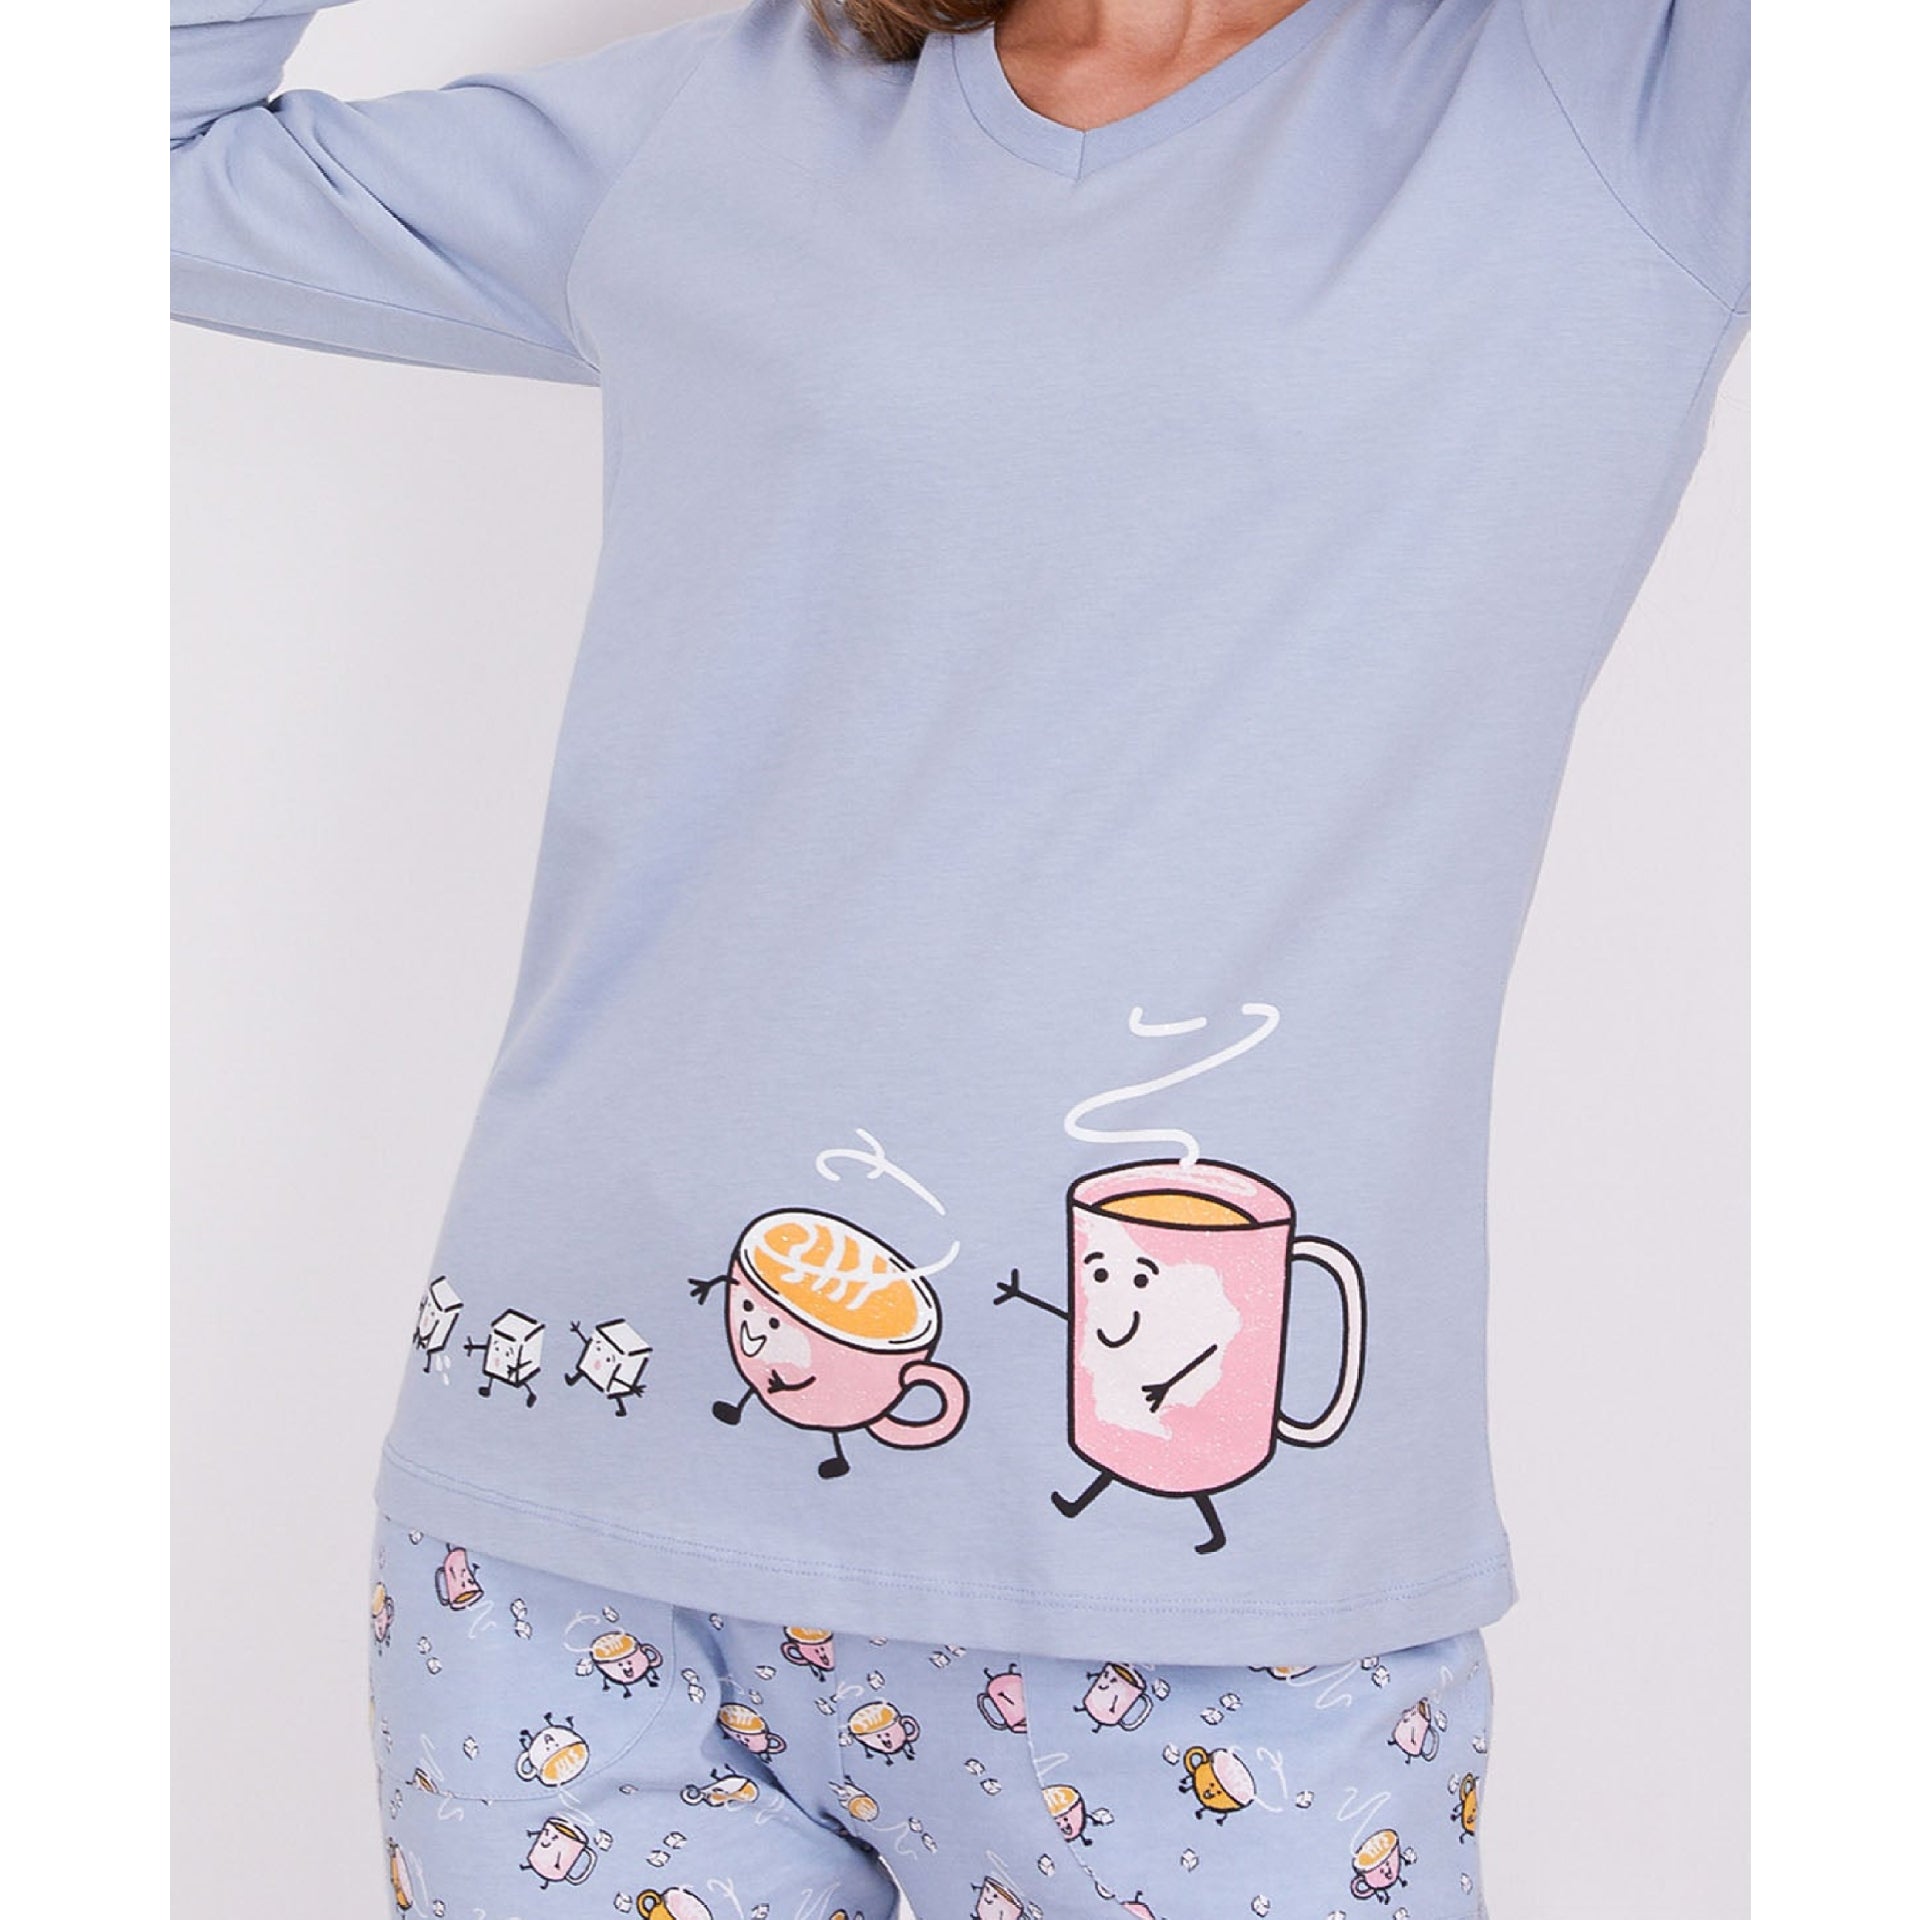 Breakfast Cup Pajama set - Breakfast Cup Pajama set - 3-4 Years - Rolypoly - Melymod